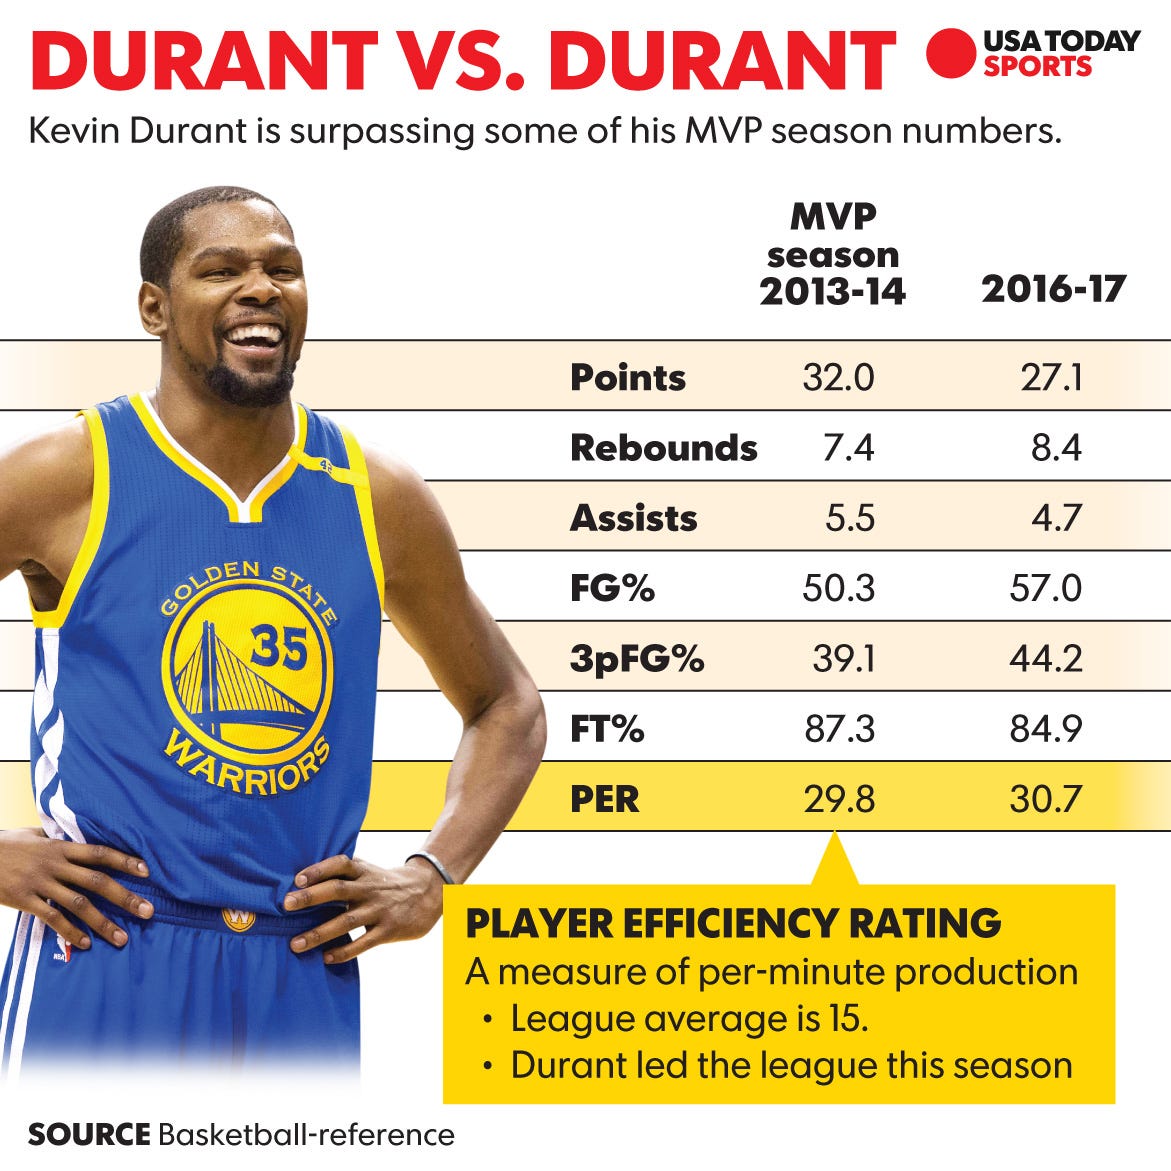 Efficient as ever, Kevin Durant on pace for historic season